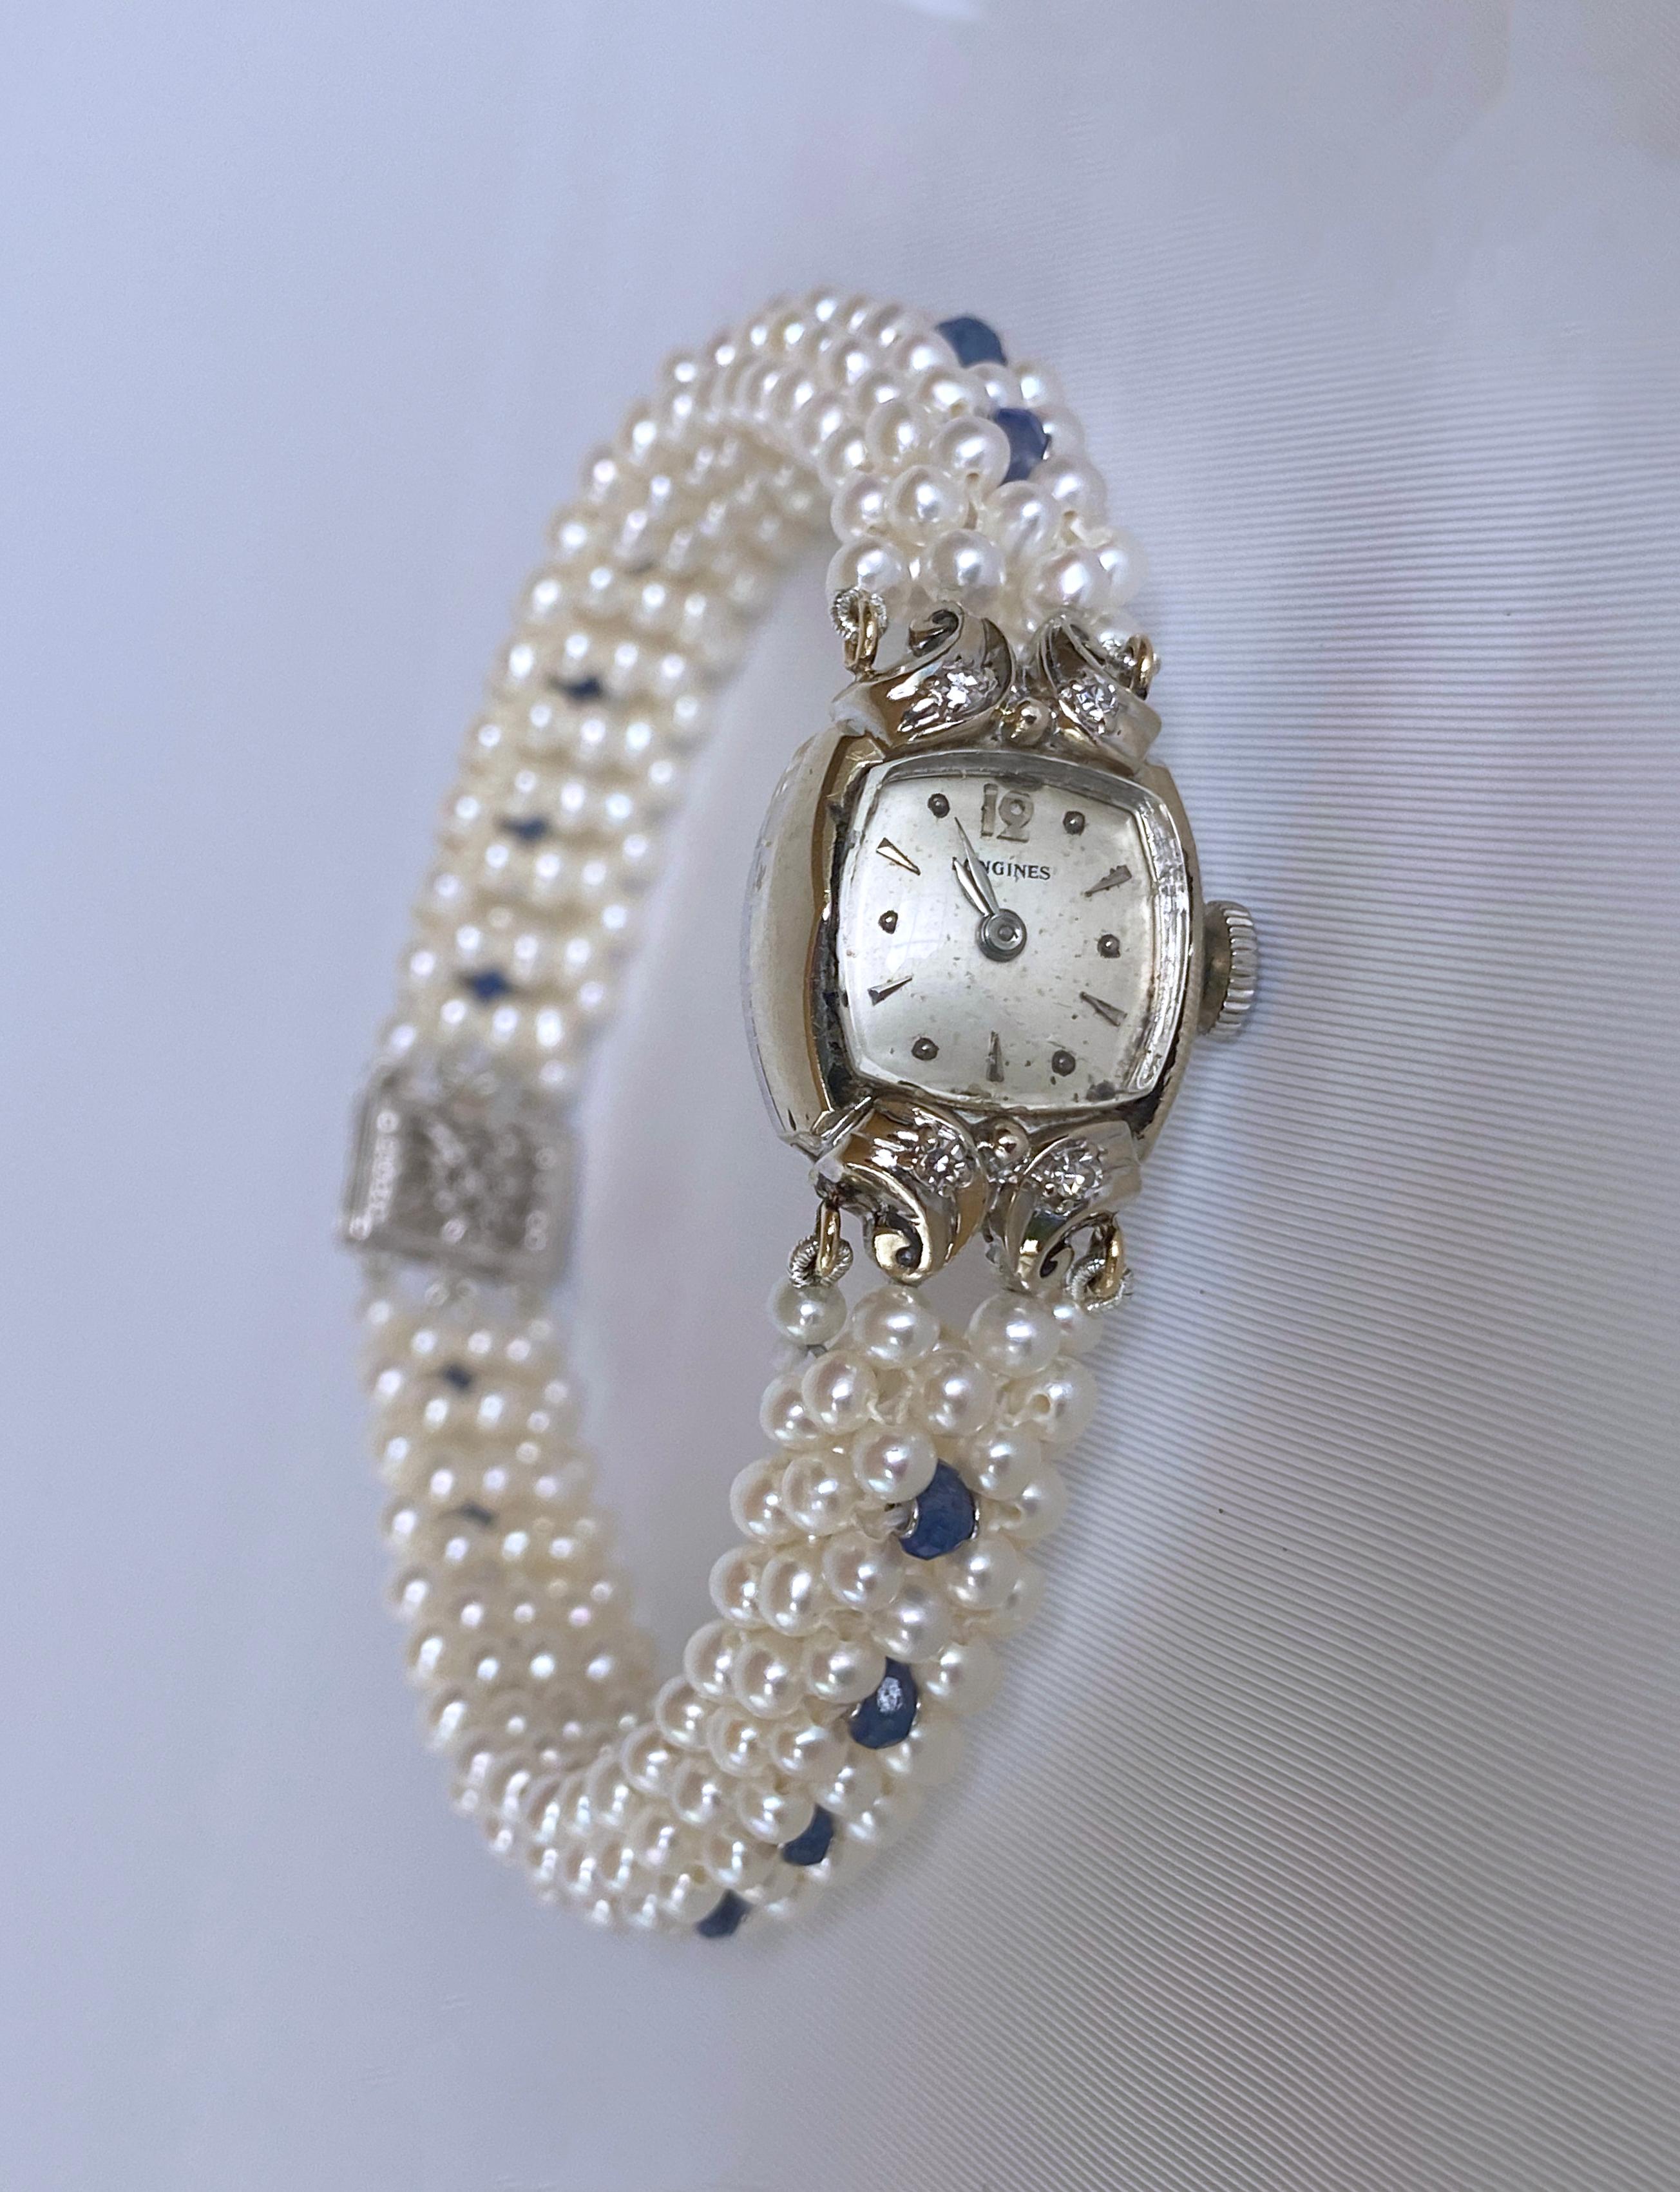 Artisan Marina J. Antique 14k Diamond Encrusted Watch with Blue Sapphire and Pearl Band